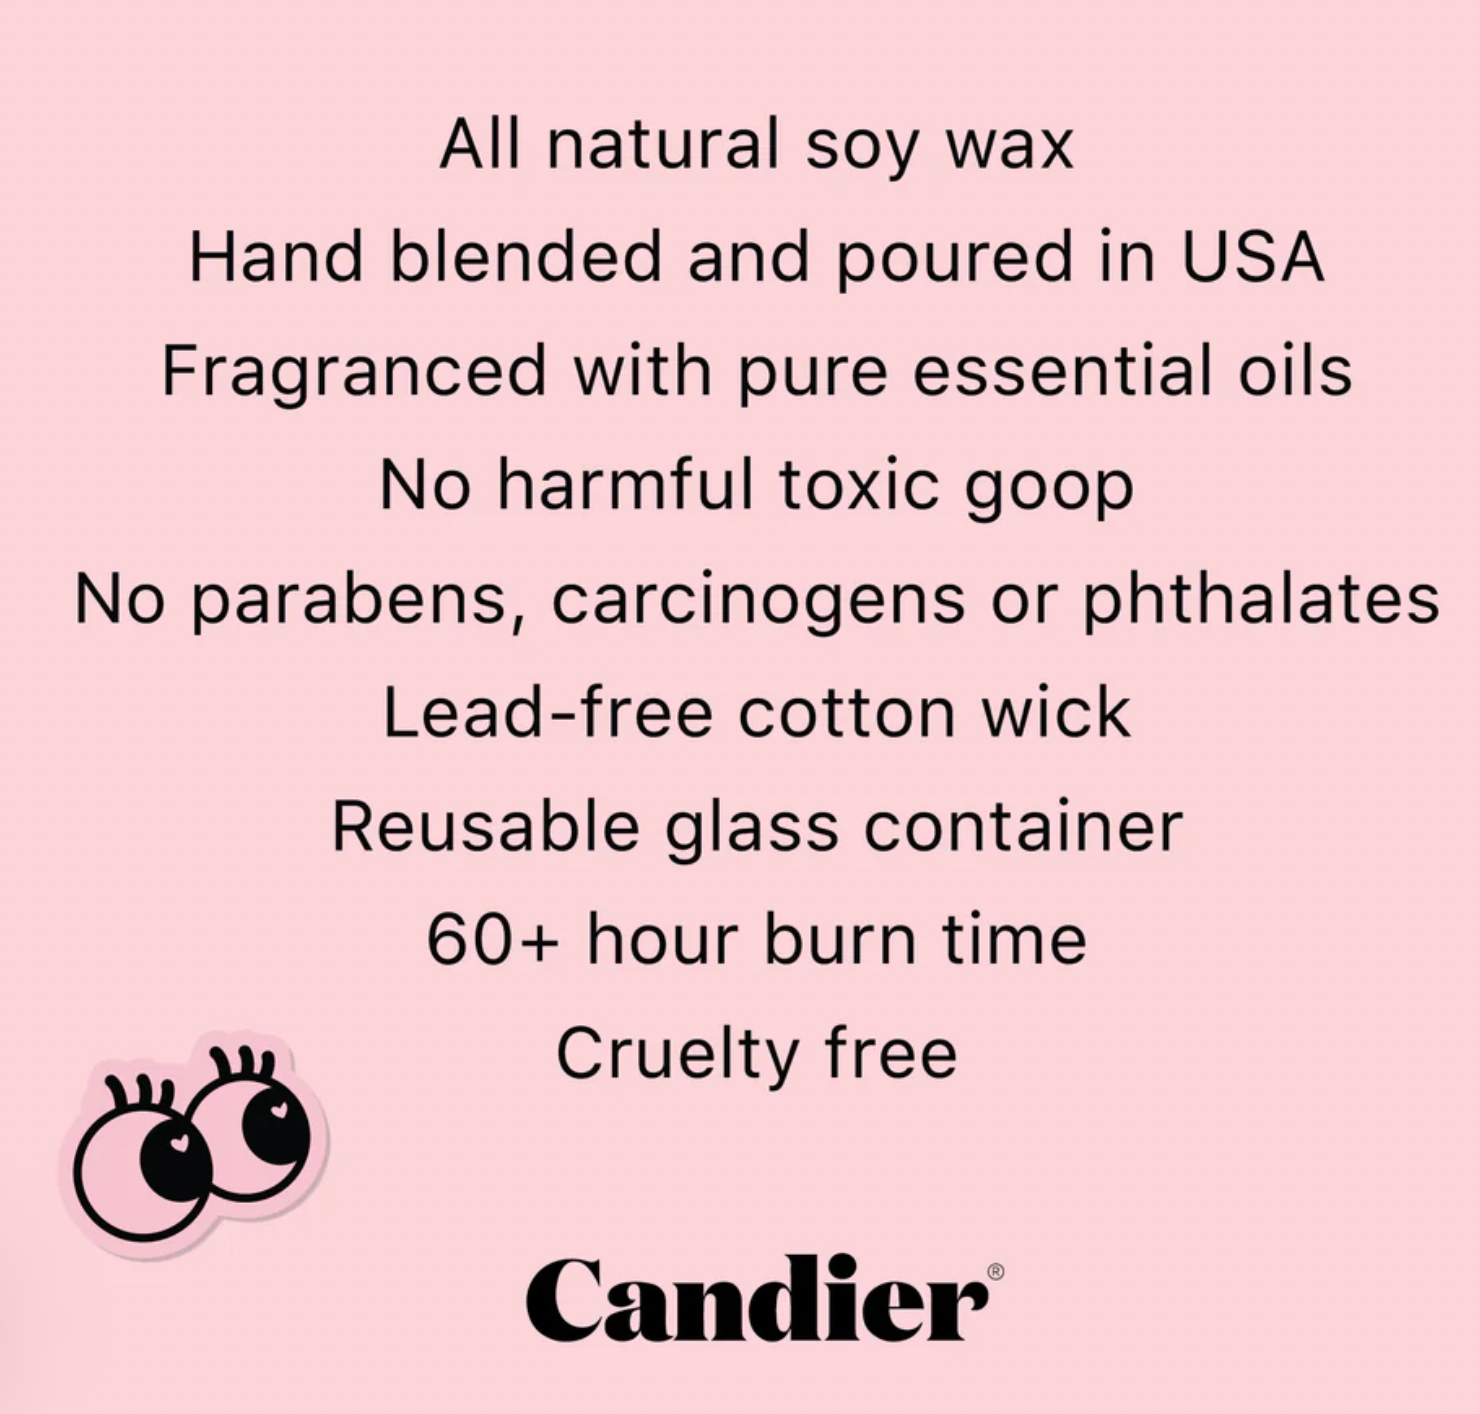 Candier SOY CANDLE "Stop and smell the rosé "